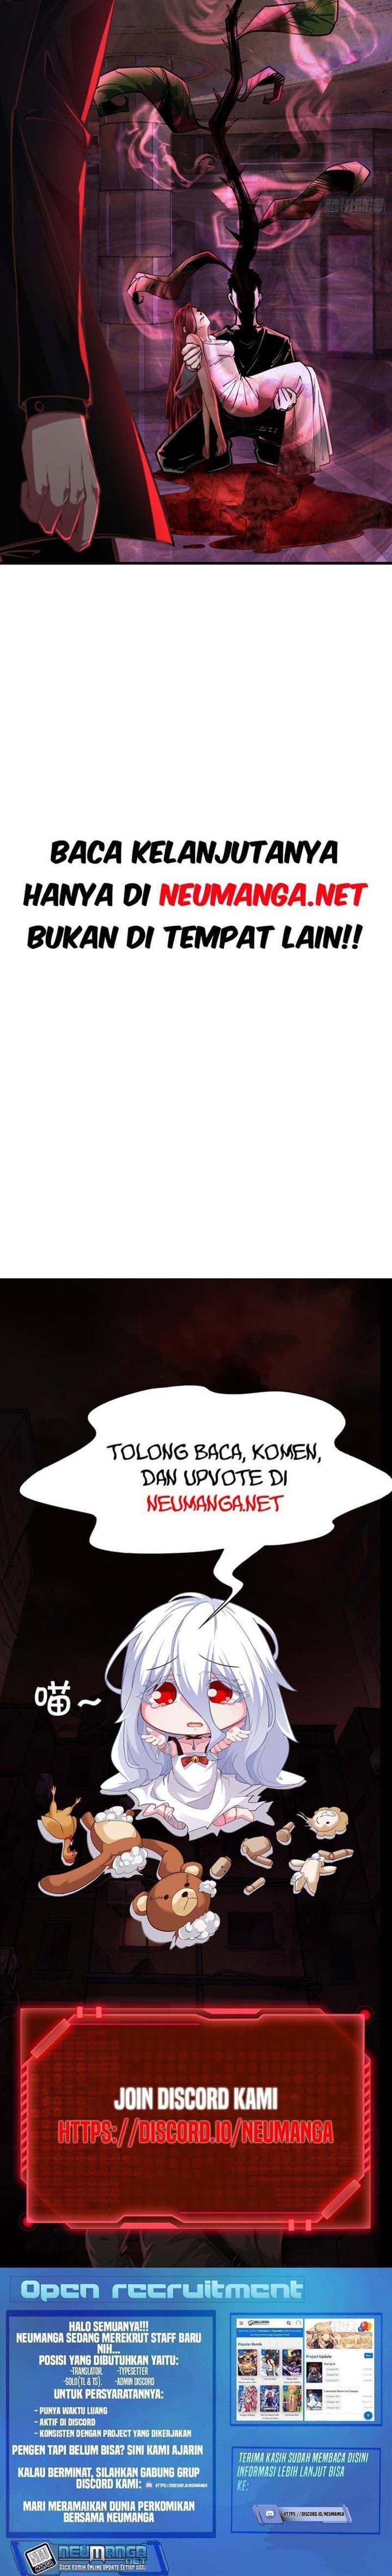 Since The Red Moon Appeared Chapter 40